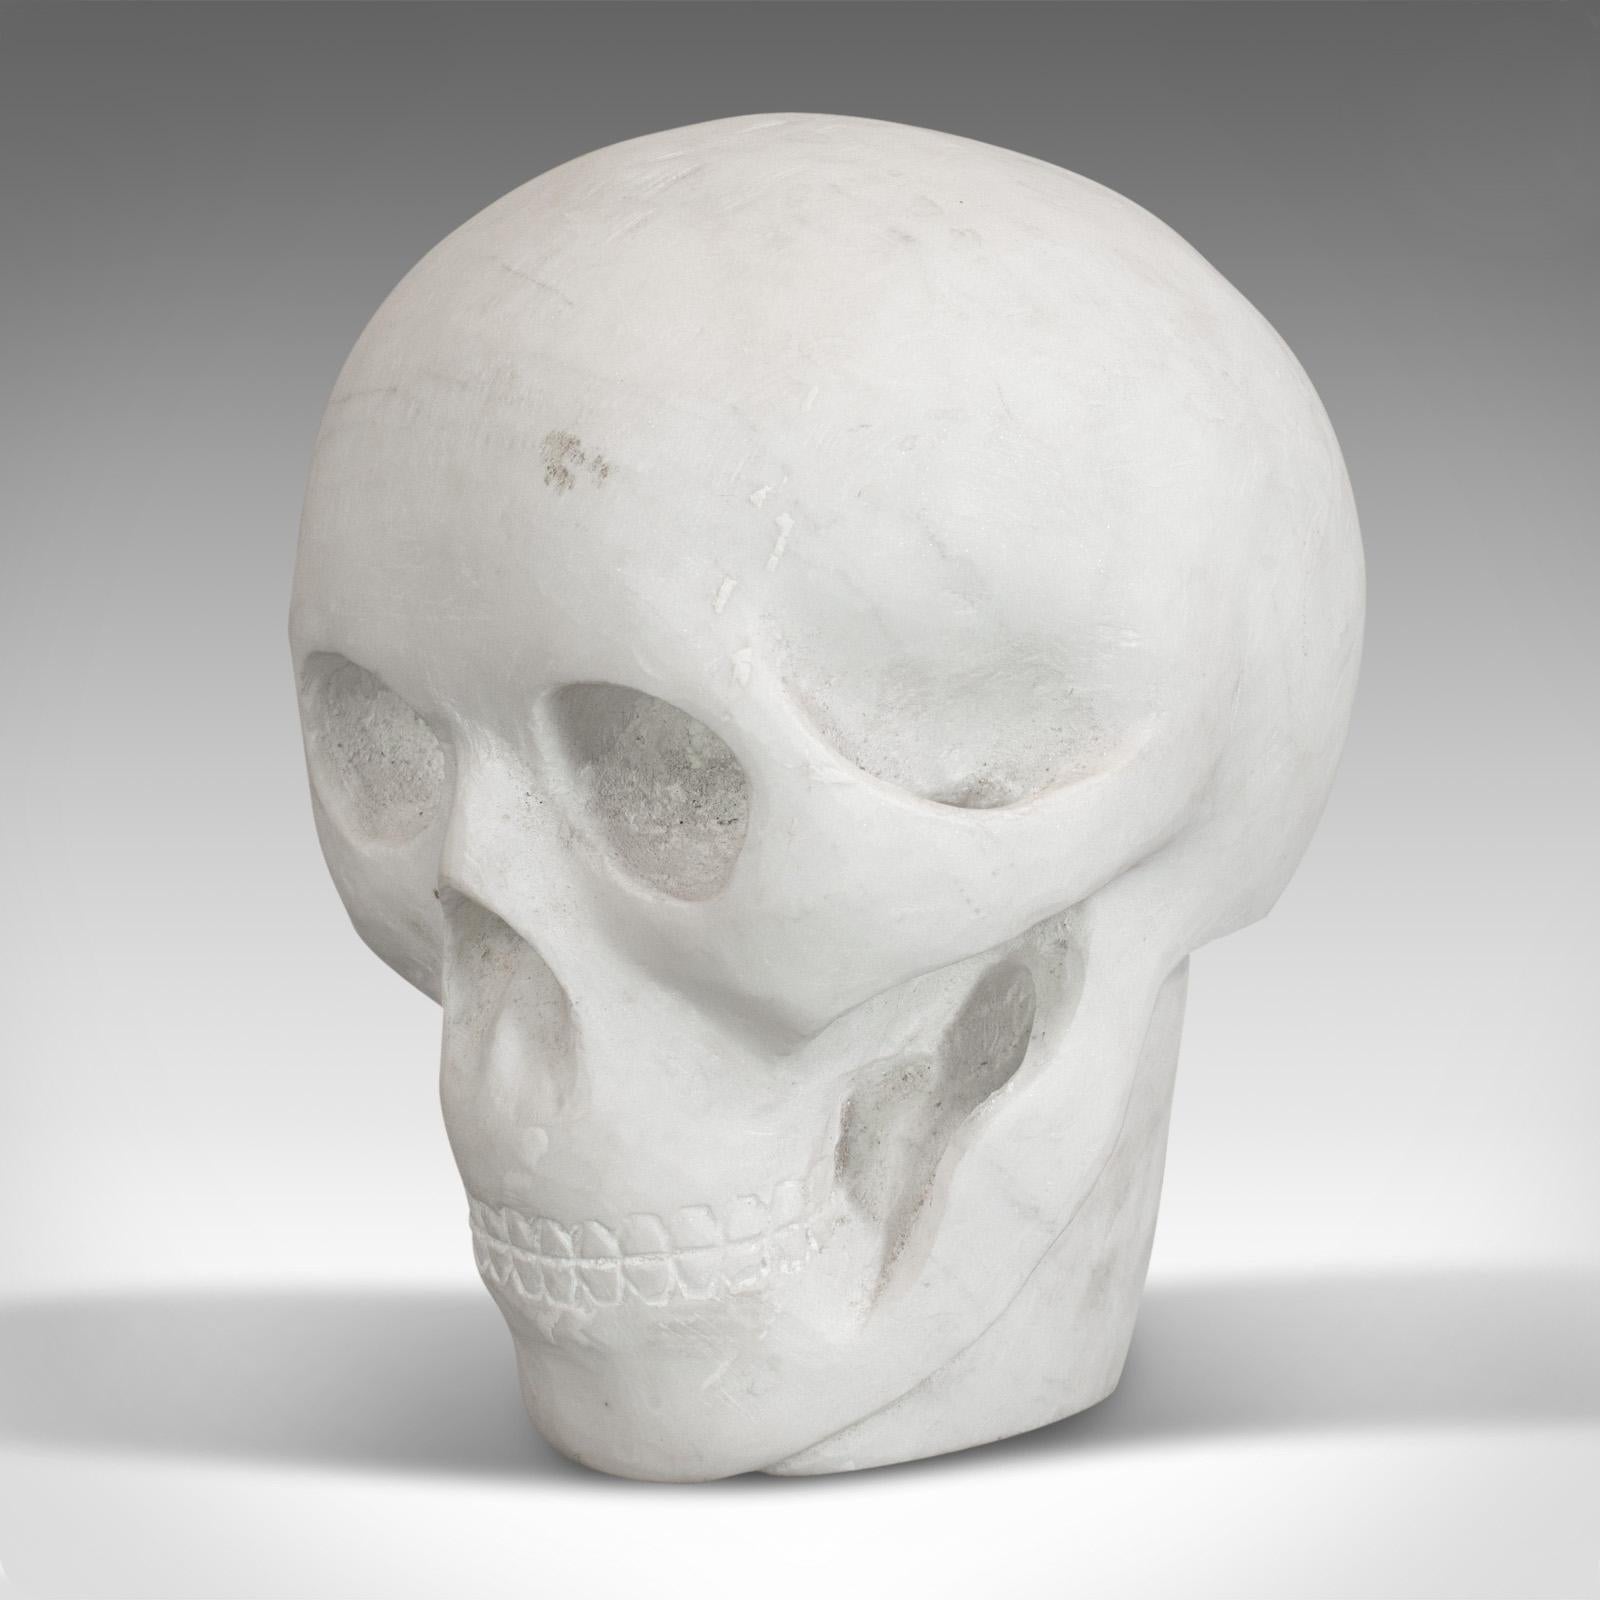 Vintage Decorative Skull, English, White Marble, Desk, Ornament, Paperweight In Good Condition For Sale In Hele, Devon, GB